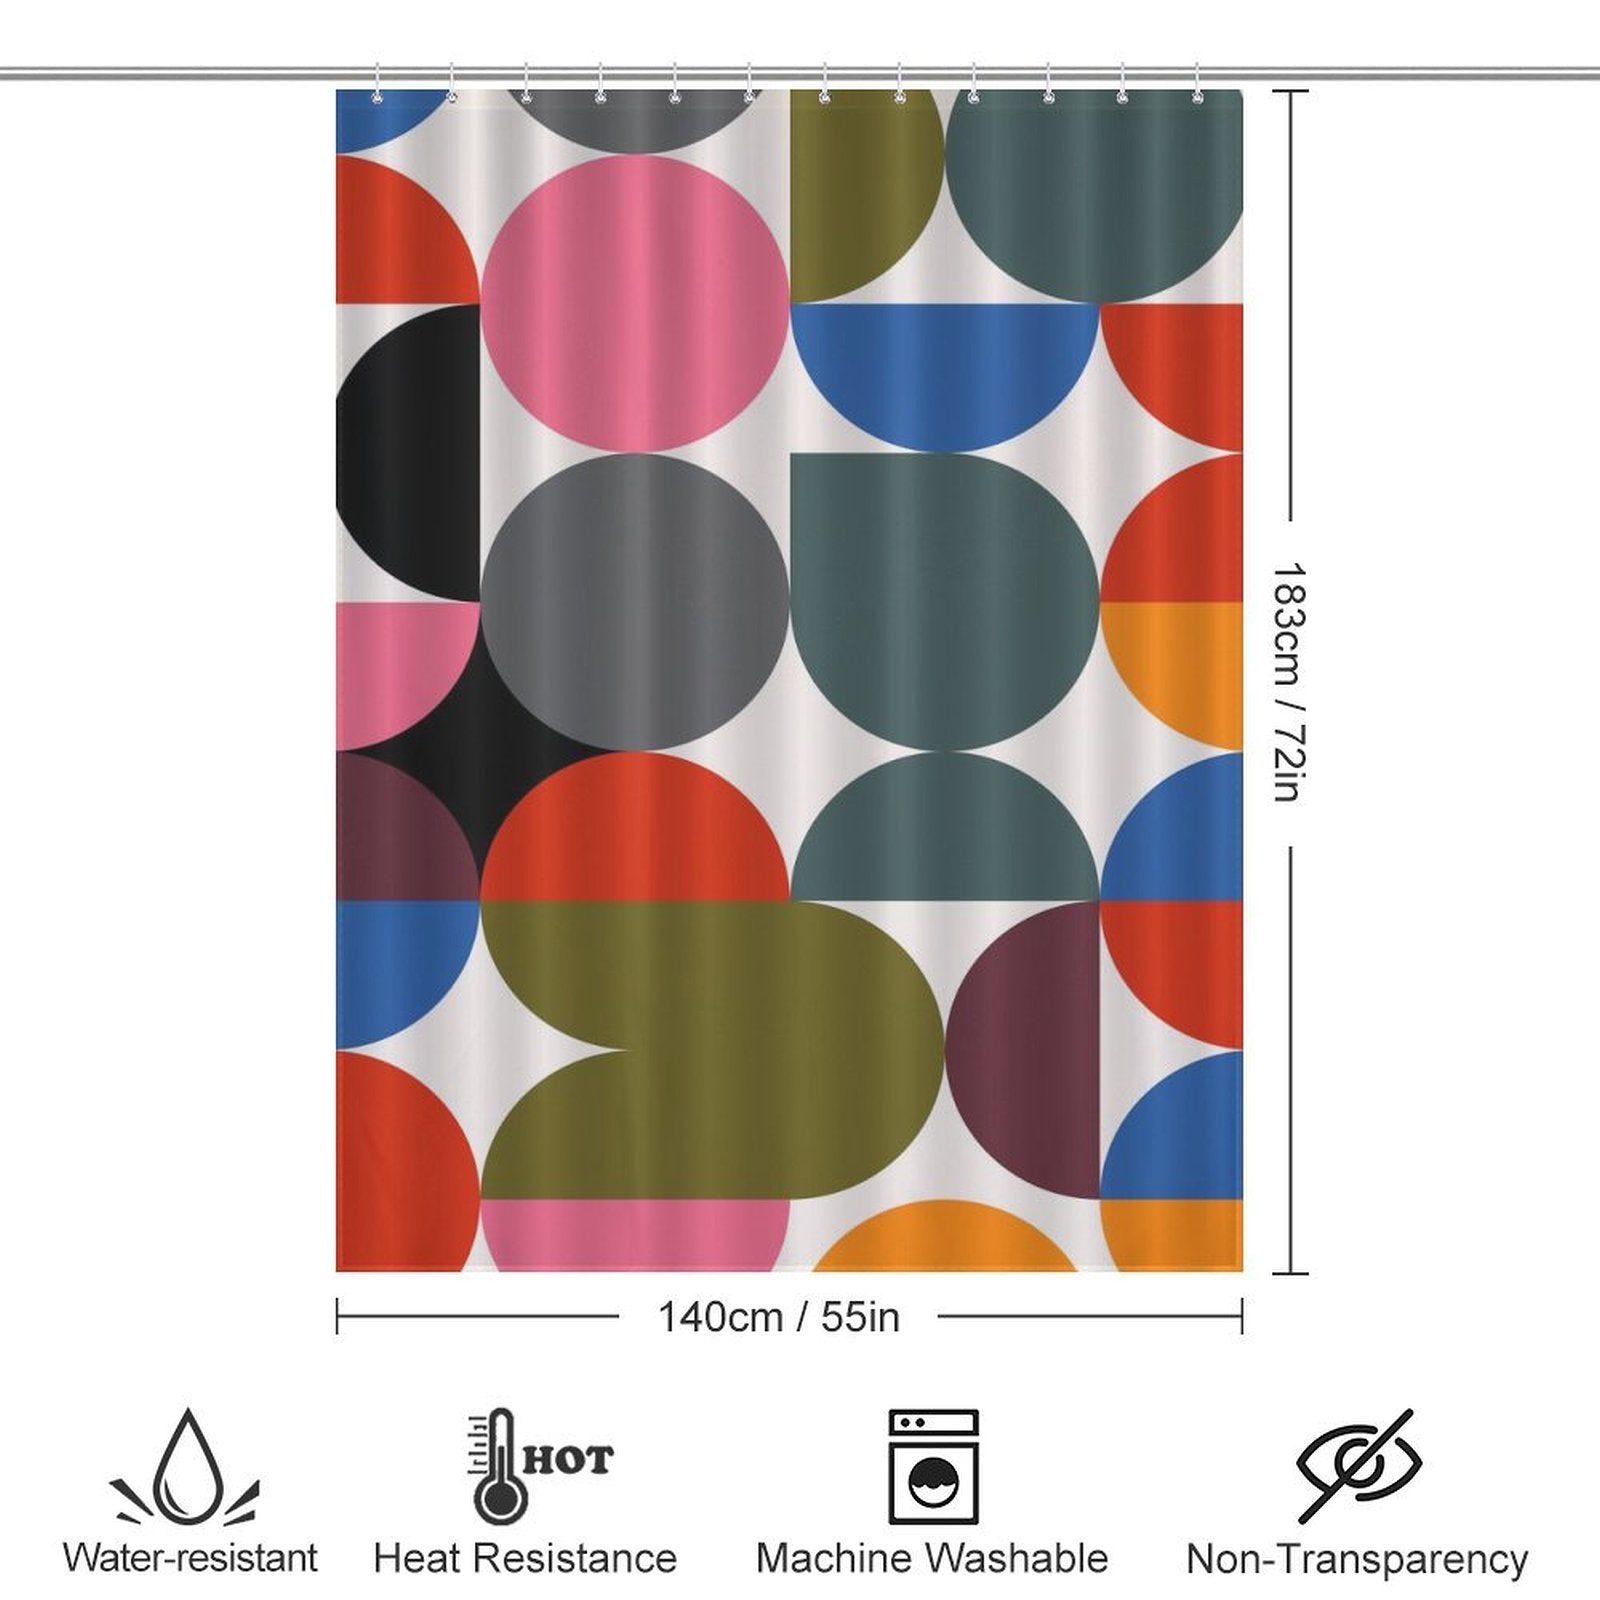 Abstract Modern Art Rainbow Polka Dot Geometric Shower Curtain-Cottoncat with a circular abstract pattern, shown with dimensions of 140cm by 183cm. Symbols at the bottom indicate water resistance, heat resistance, machine washability, and non-transparency.